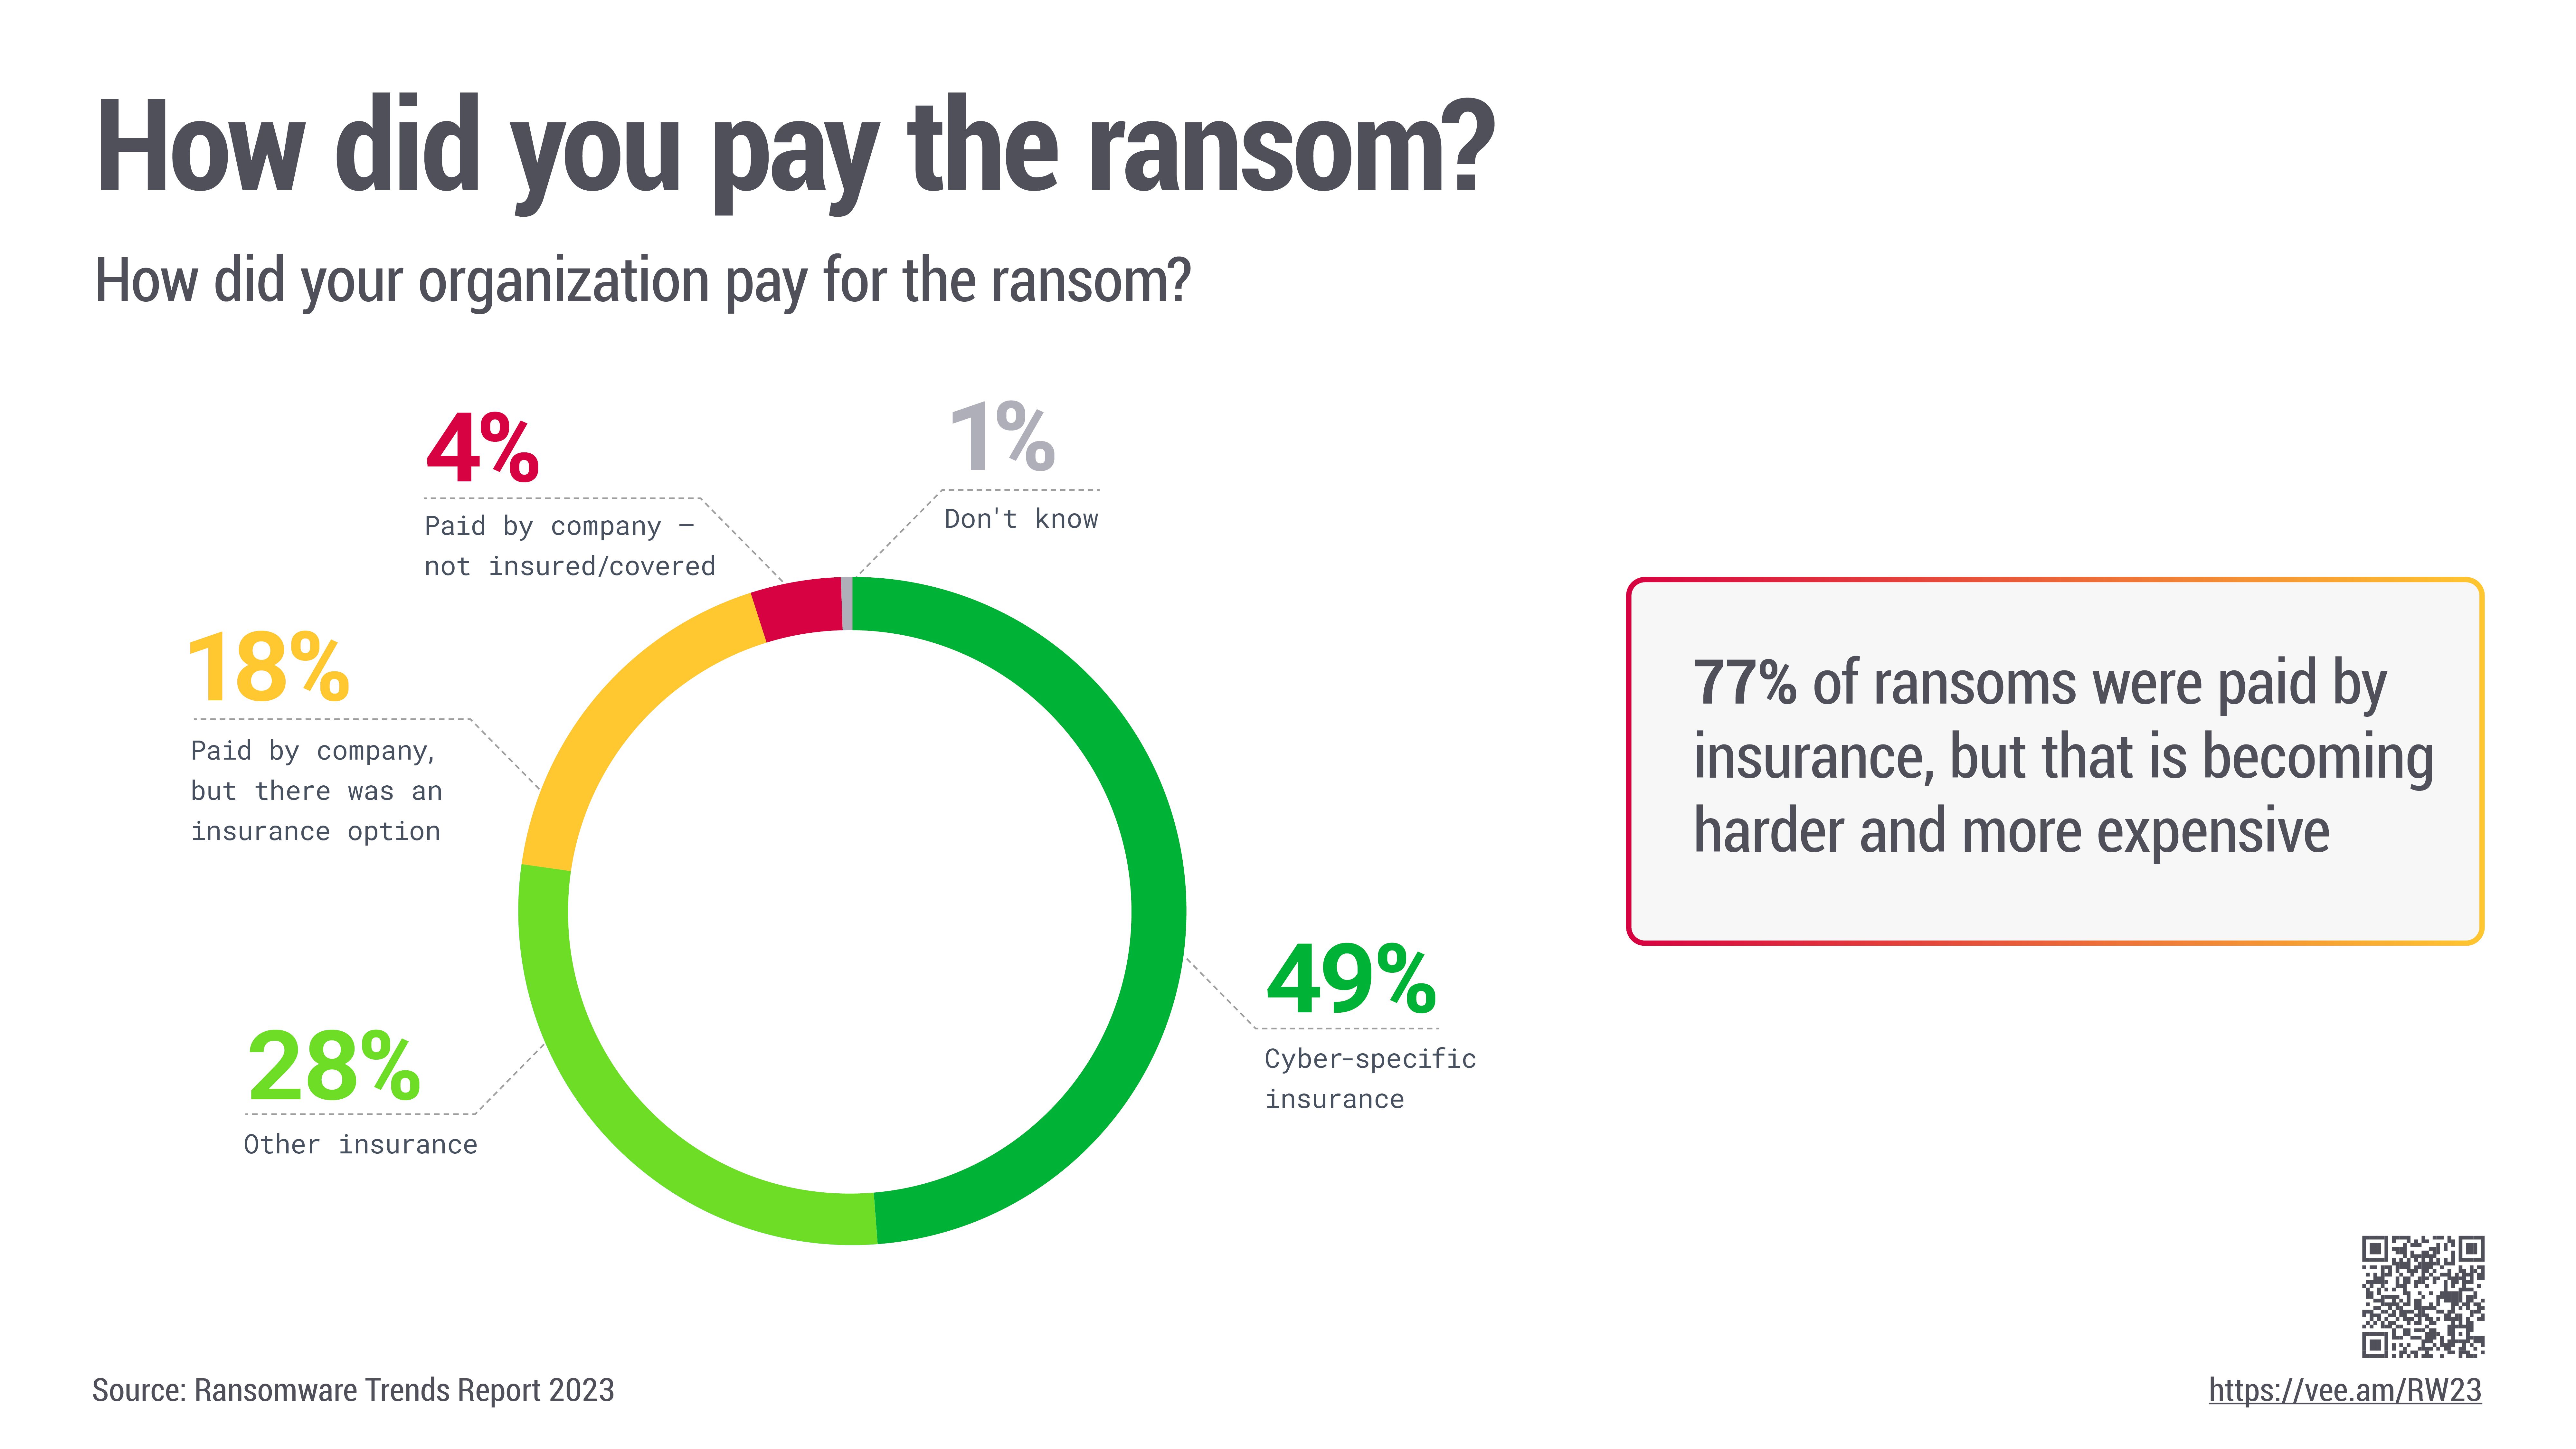 New Veeam Research Finds 93% of Cyber Attacks Target Backup Storage to Force Ransom Payment